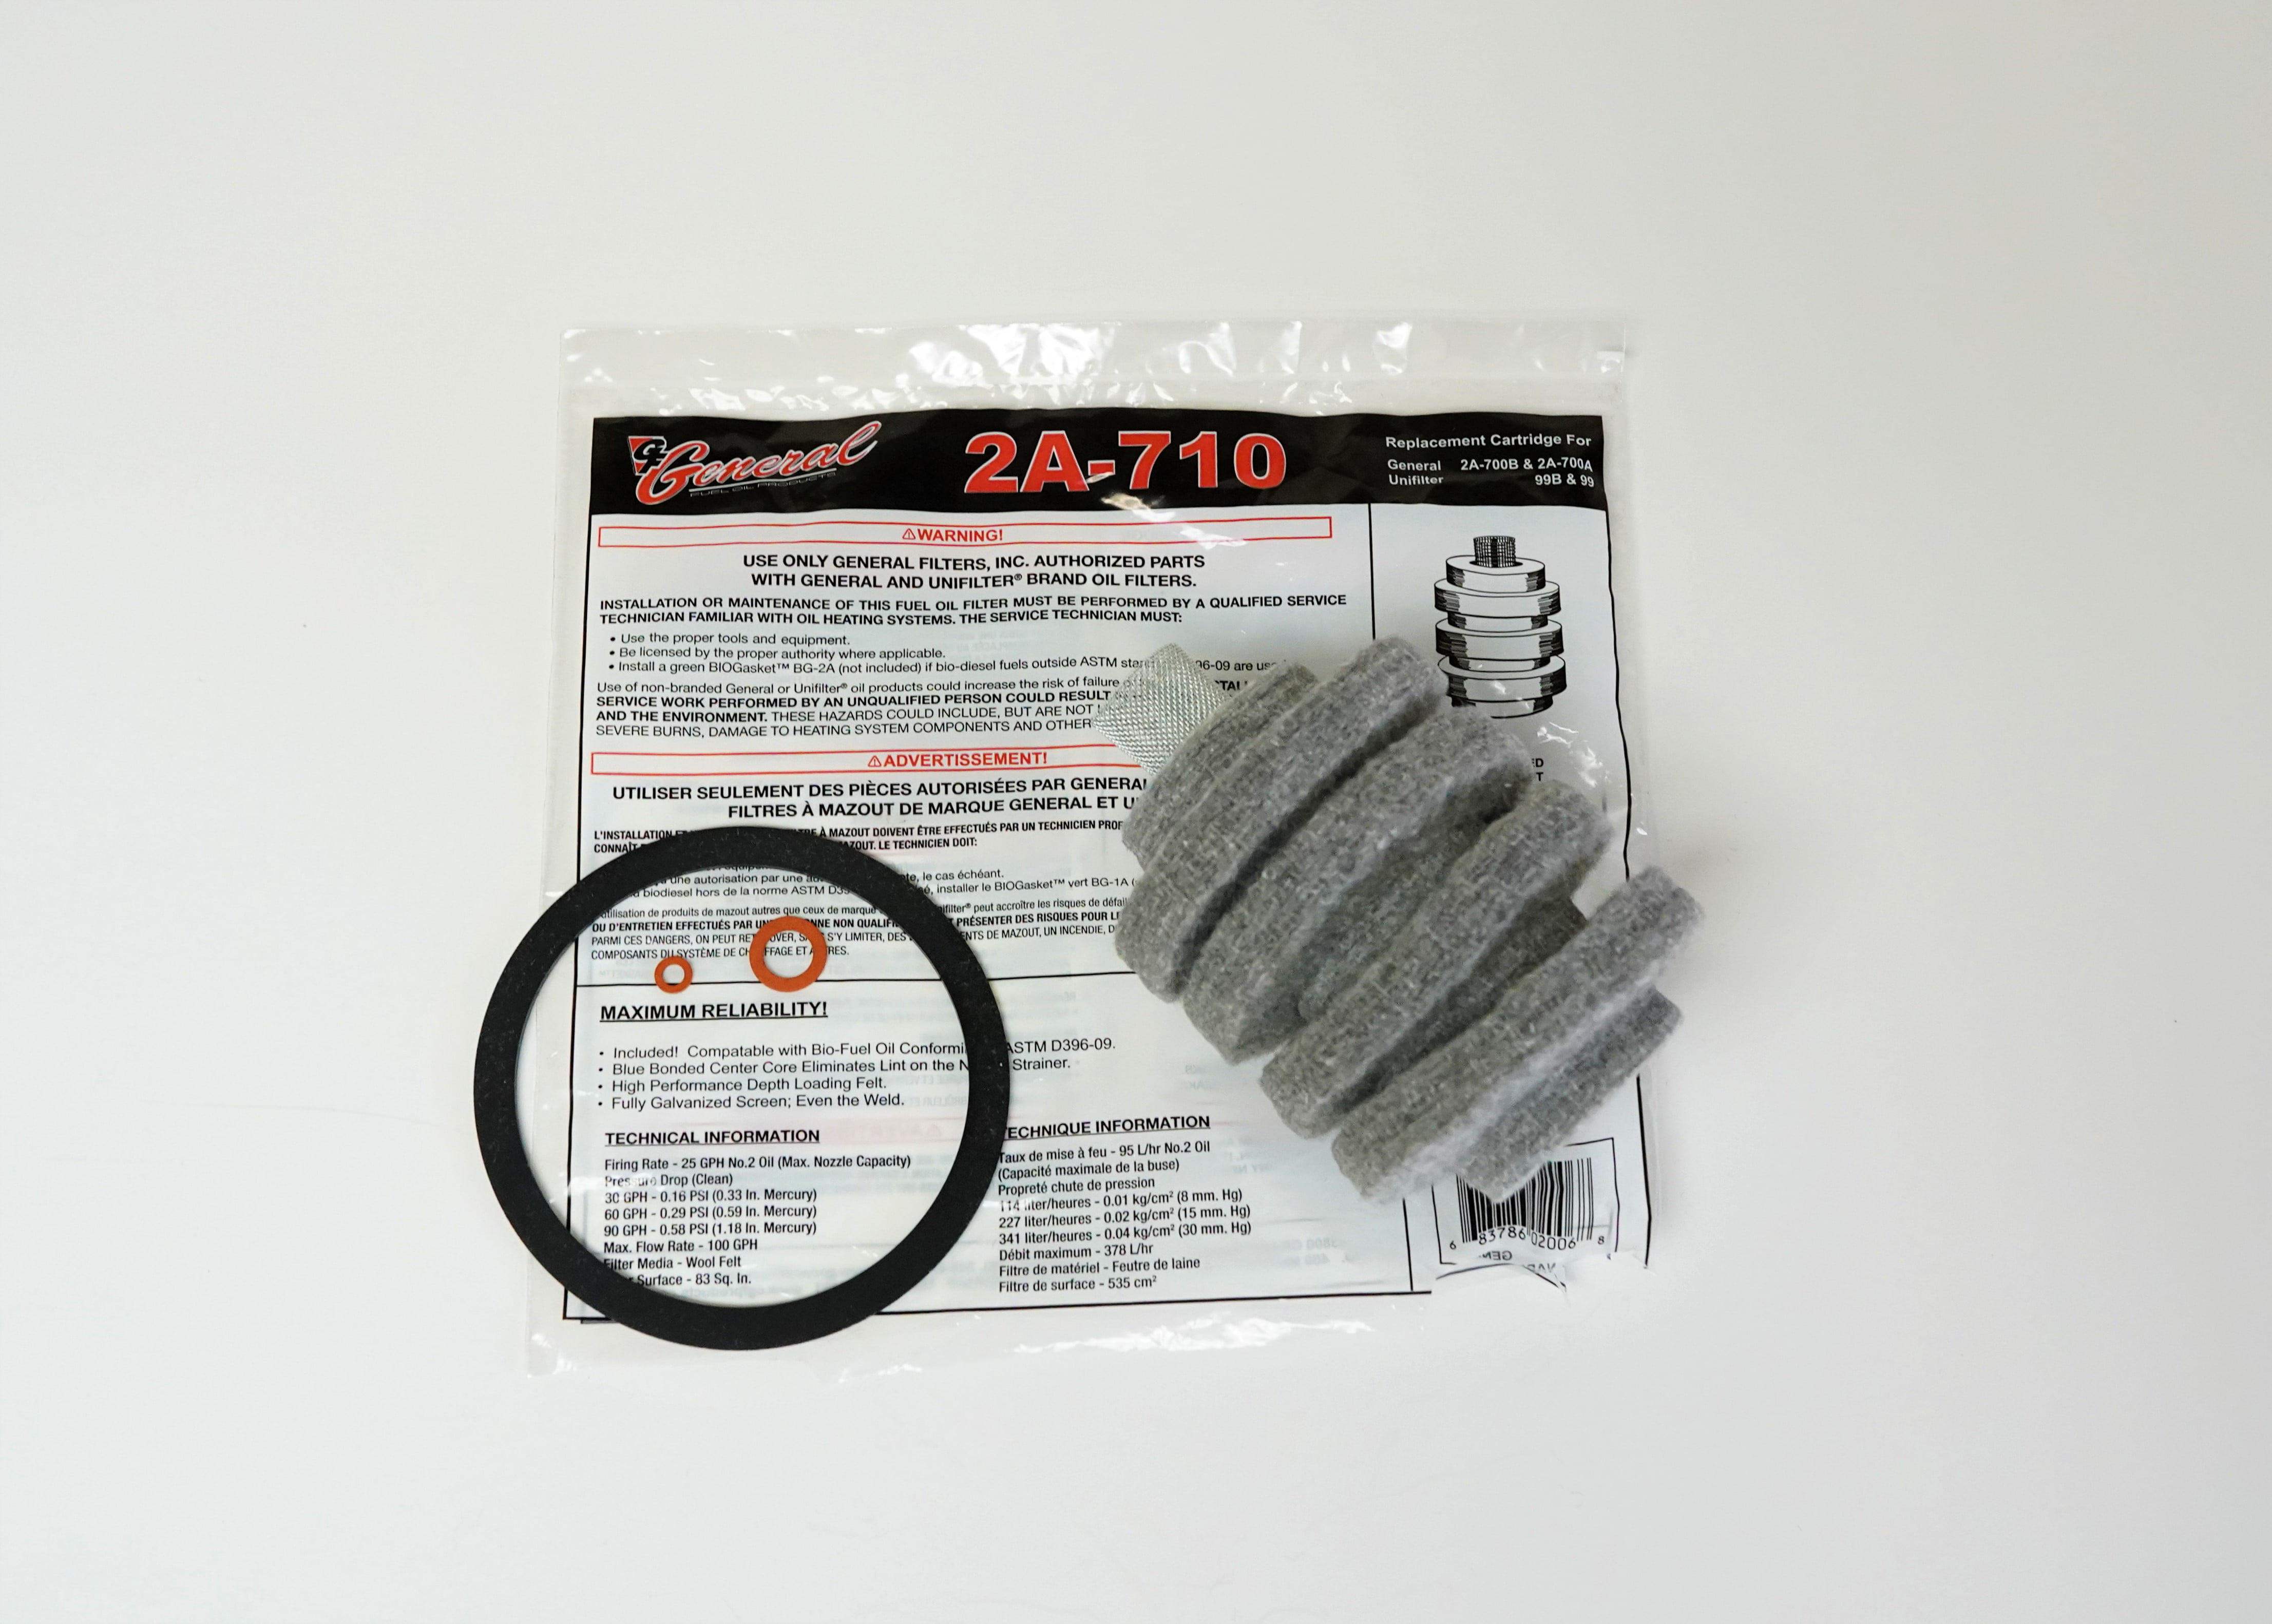 General Filters 2A710 Fuel Oil Filter Replacement Cartridge for sale online 